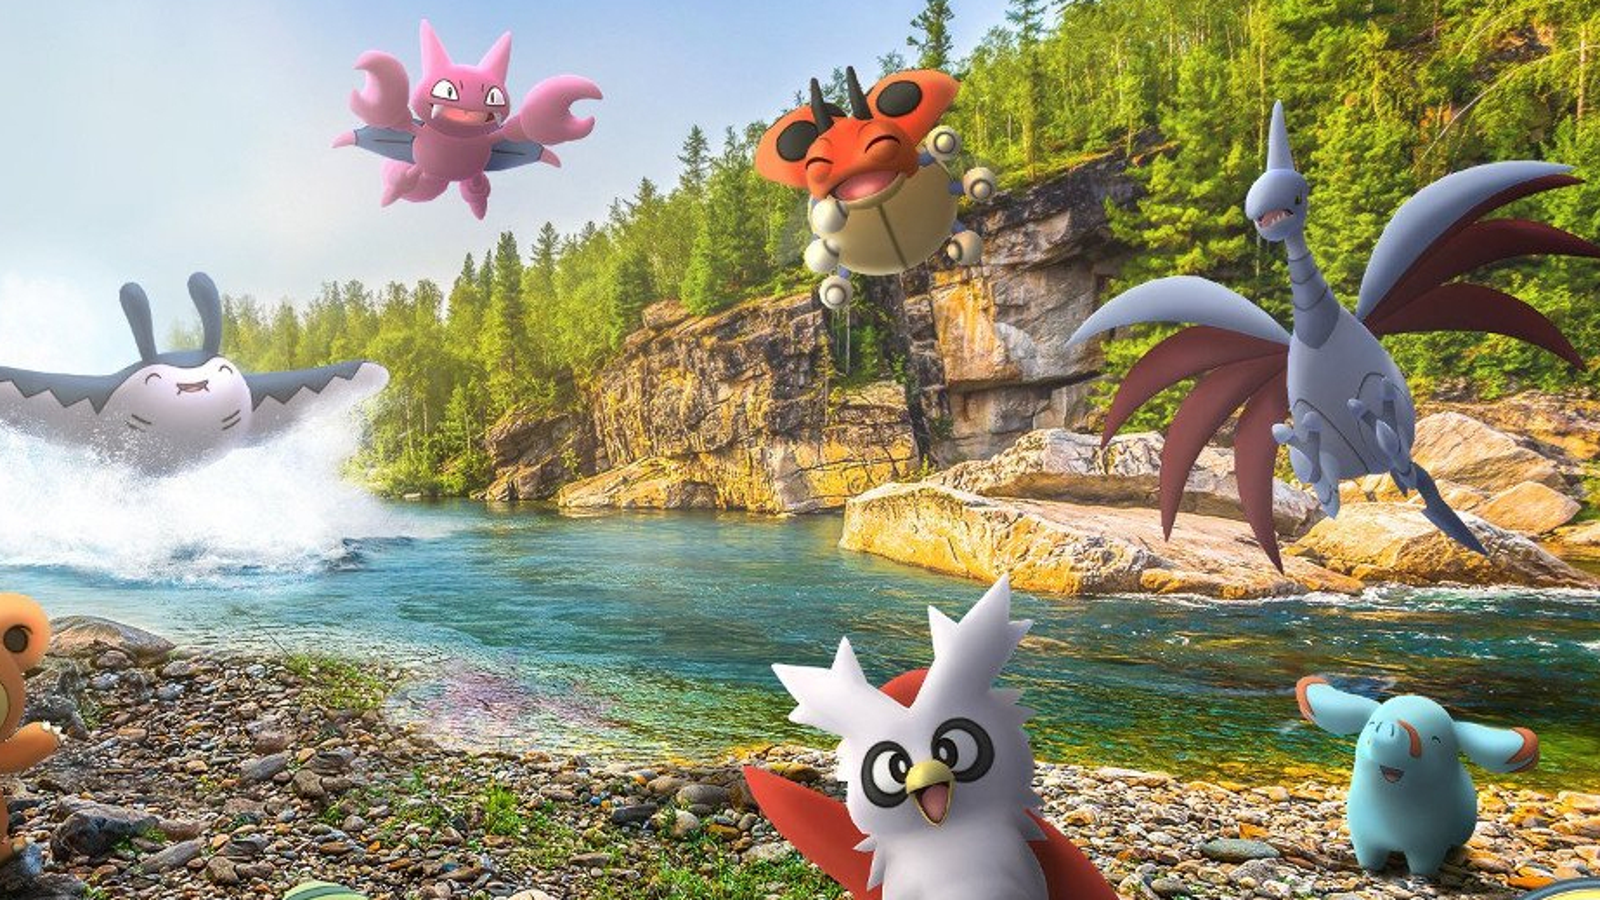 Pokemon Go fans point out big missed opportunity with Shadow Lugia